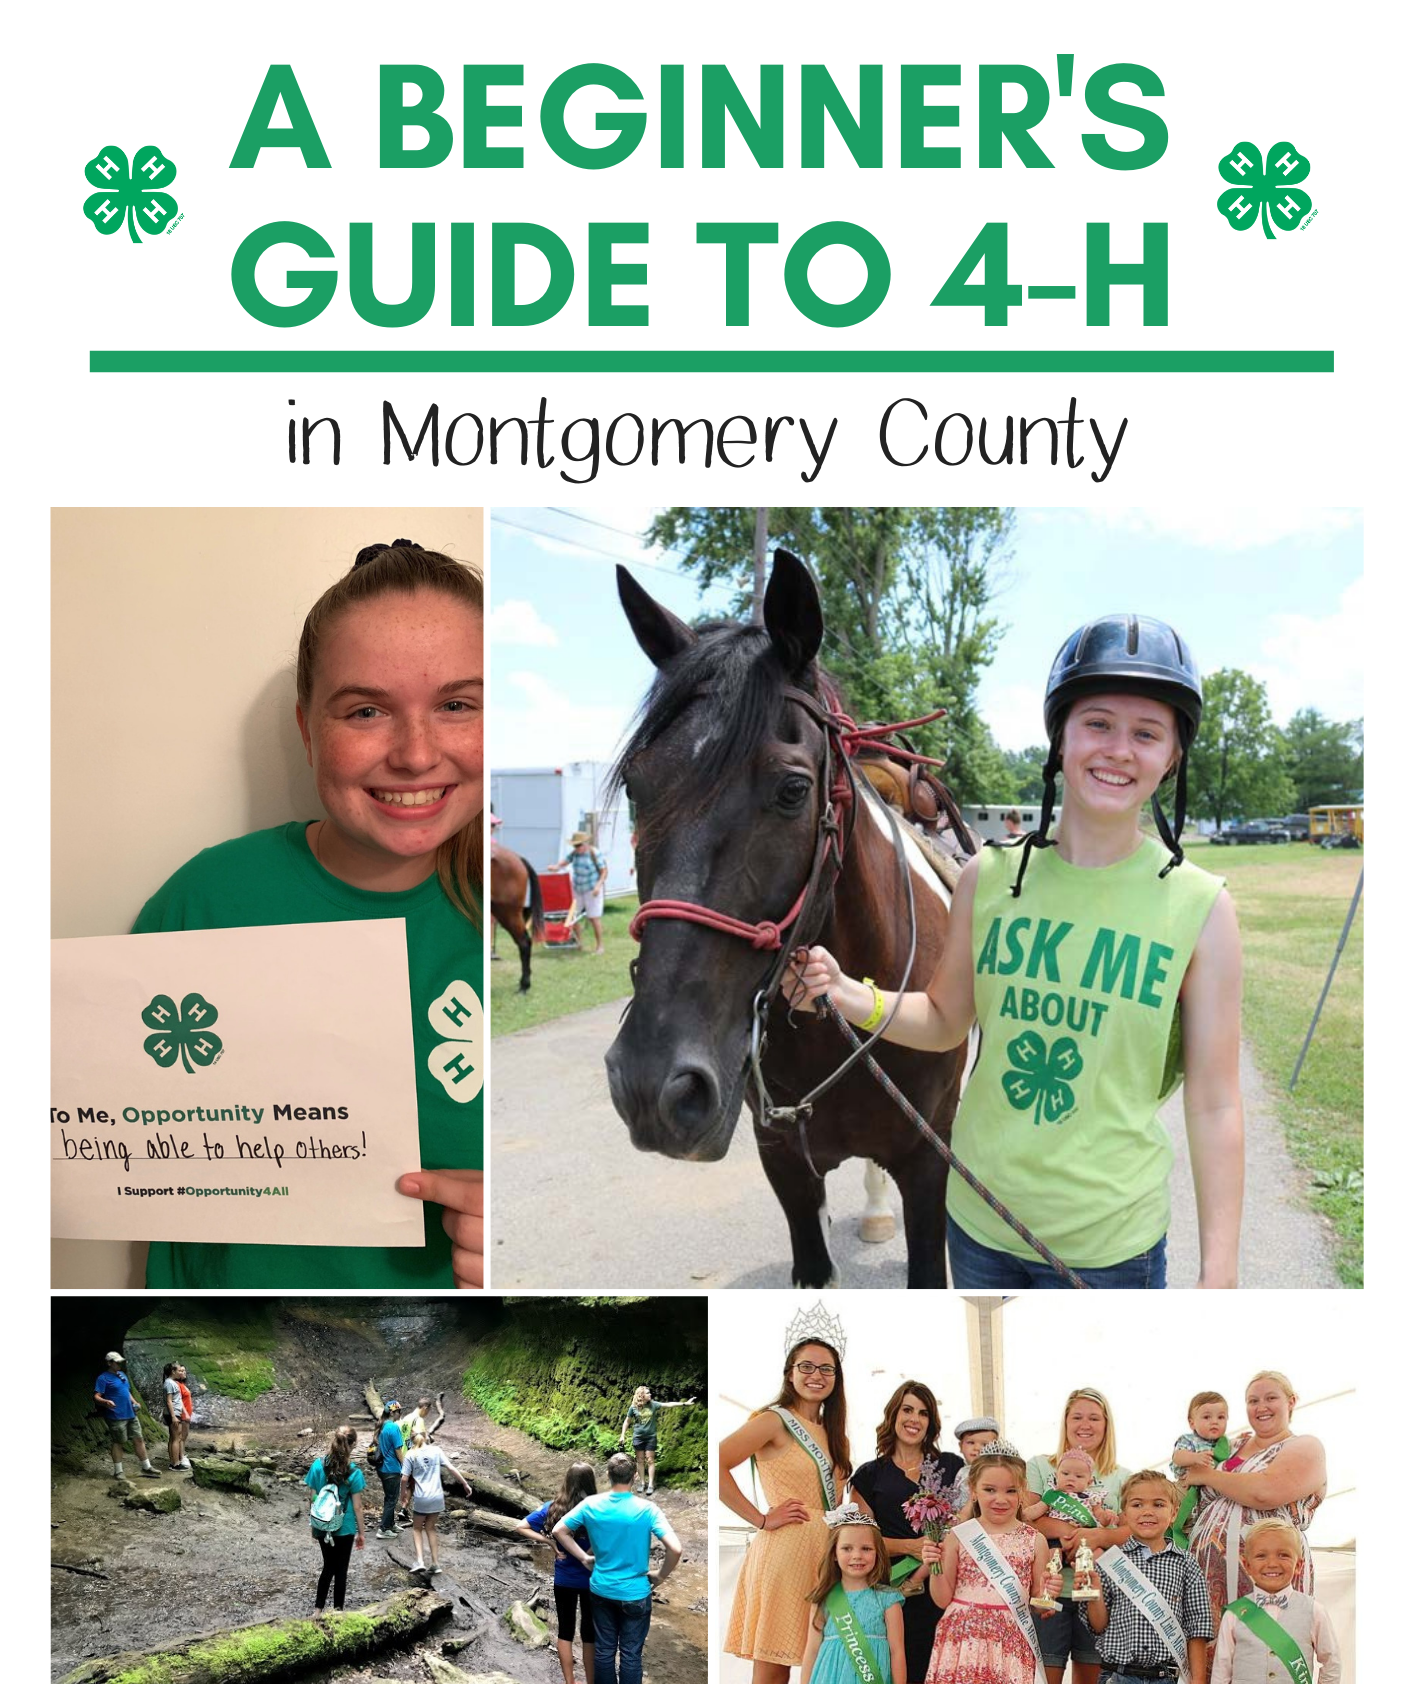 A Beginner's Guide to 4-H in Montgomery County